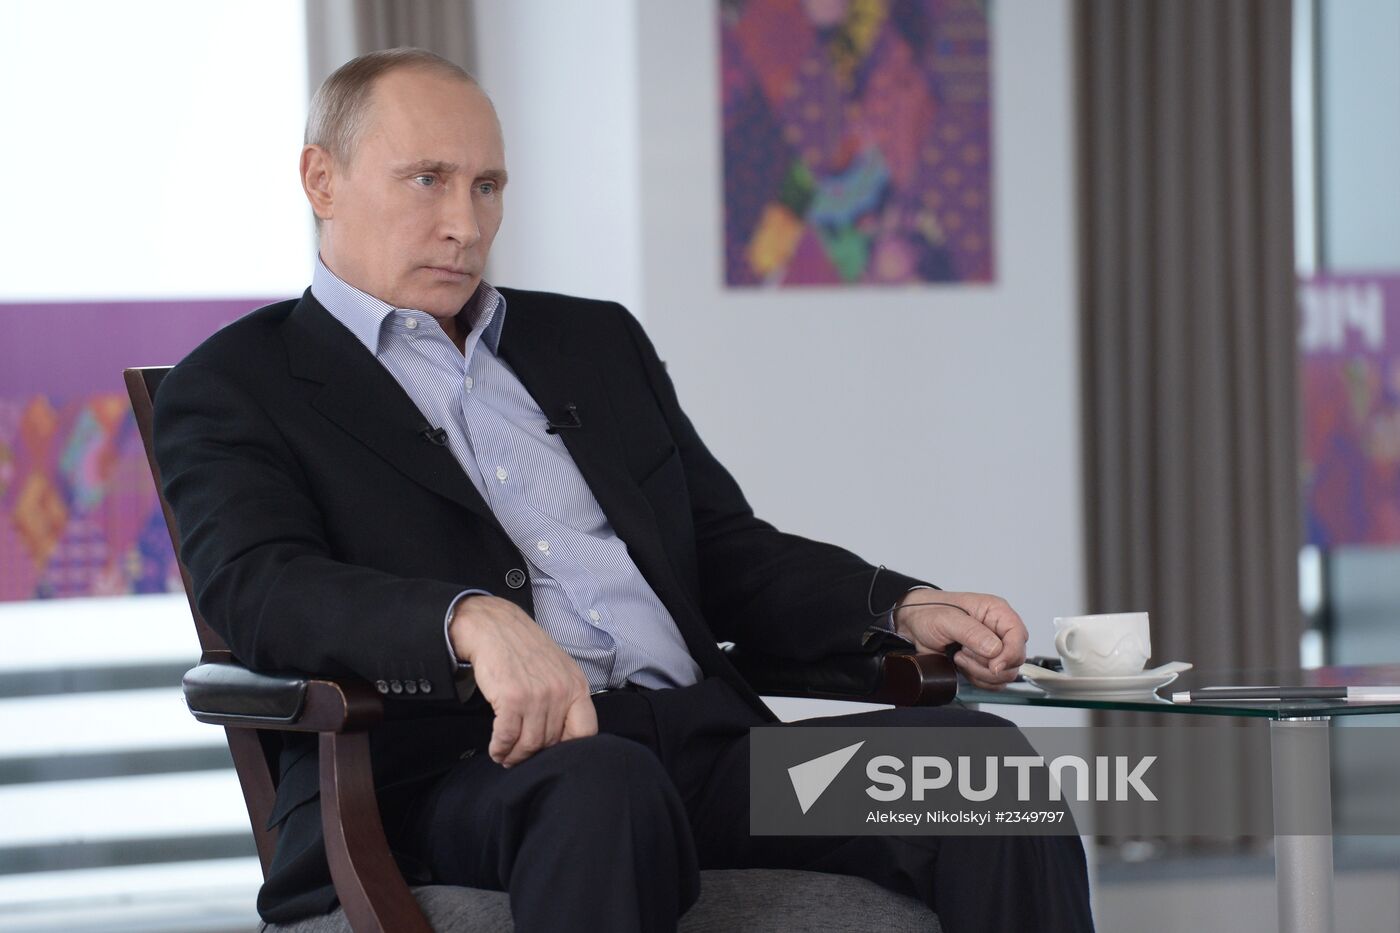 Vladimir Putin gave an interview to Russian and foreign media